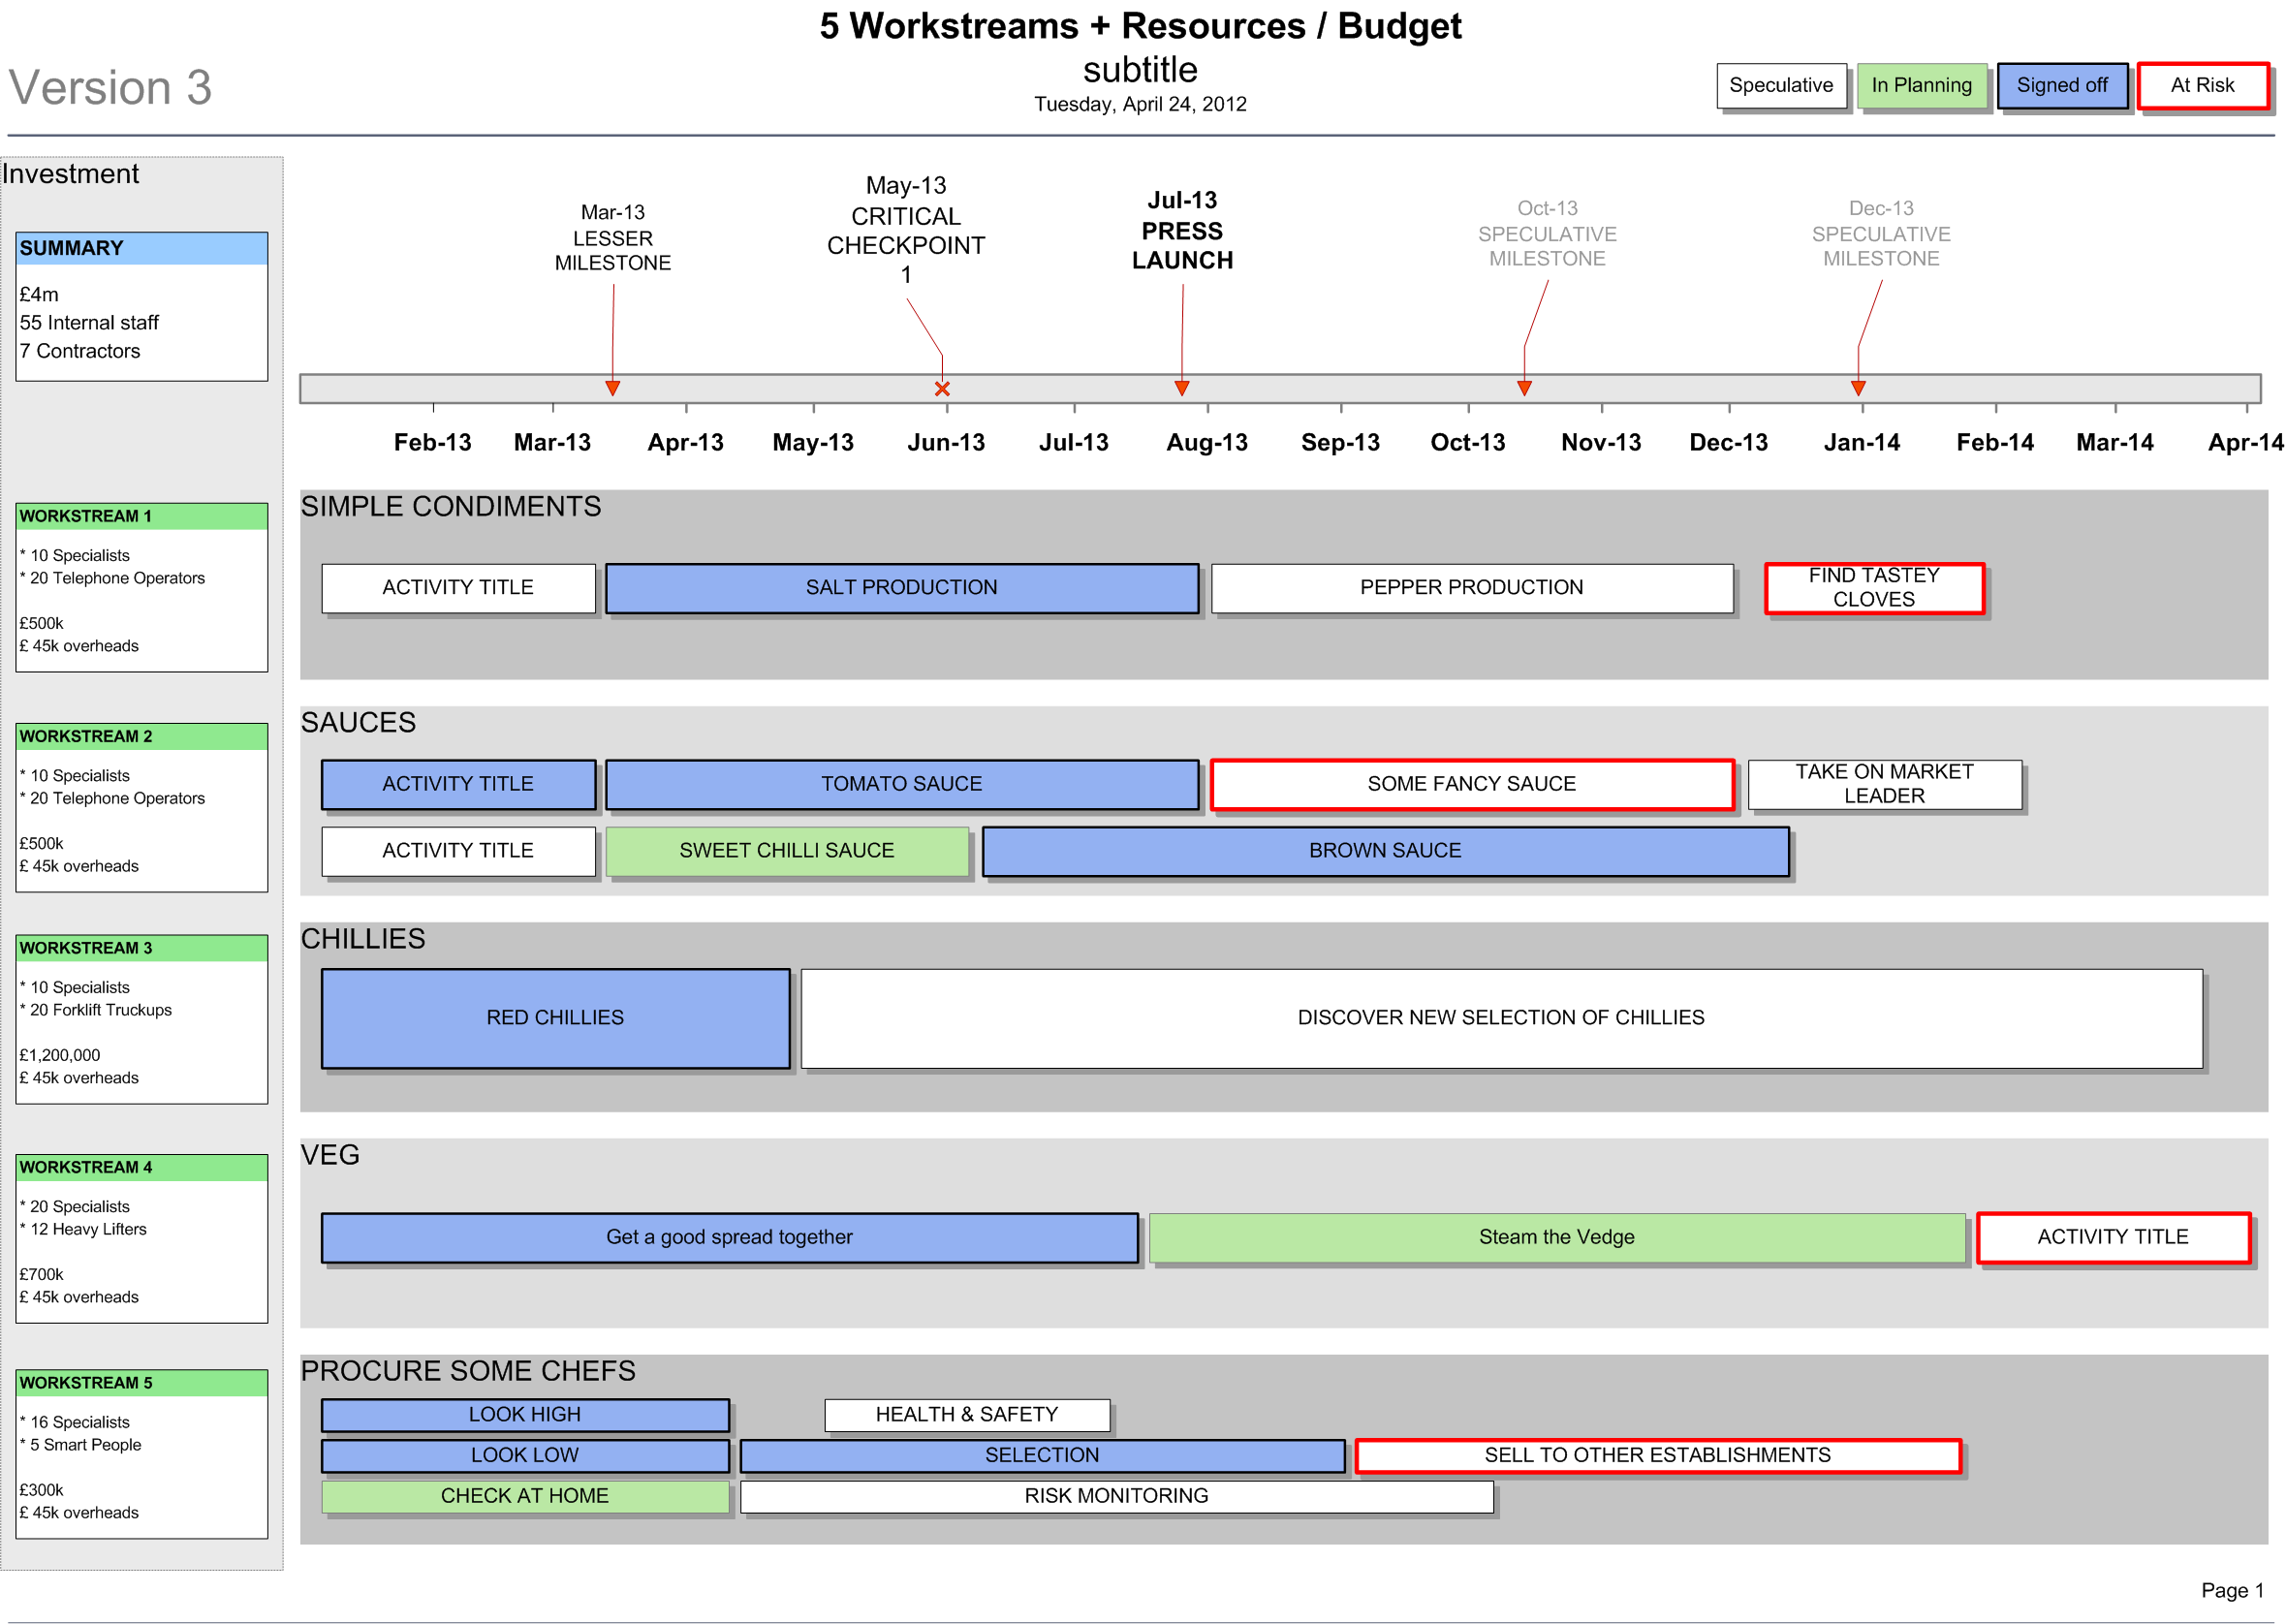 Visio Project Roadmap Template with Resources Budget